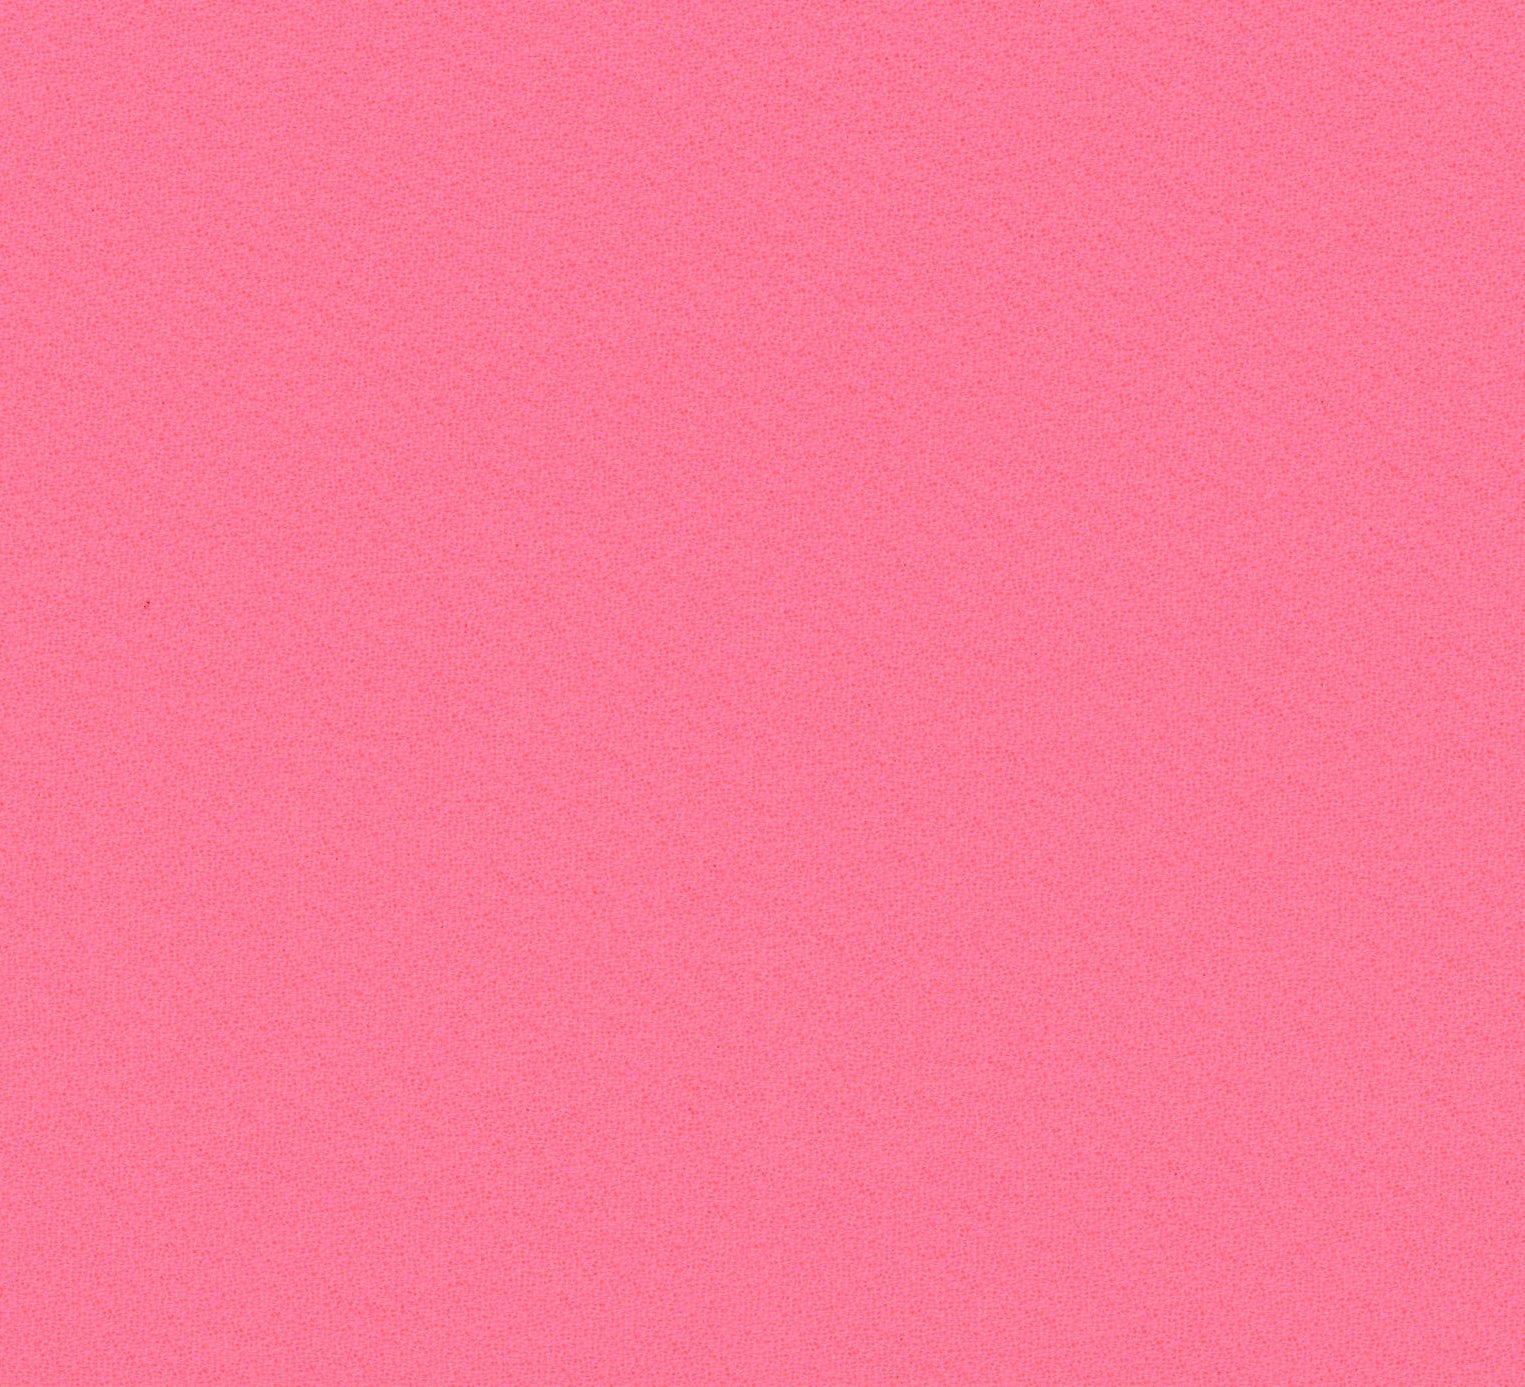 35005-03 Pink Polyester Plain Dyed 280g/yd 54&quot; pink plain dyed polyester woven Solid Color - knit fabric - woven fabric - fabric company - fabric wholesale - fabric b2b - fabric factory - high quality fabric - hong kong fabric - fabric hk - acetate fabric - cotton fabric - linen fabric - metallic fabric - nylon fabric - polyester fabric - spandex fabric - chun wing hing - cwh hk - fabric worldwide ship - 針織布 - 梳織布 - 布料公司- 布料批發 - 香港布料 - 秦榮興